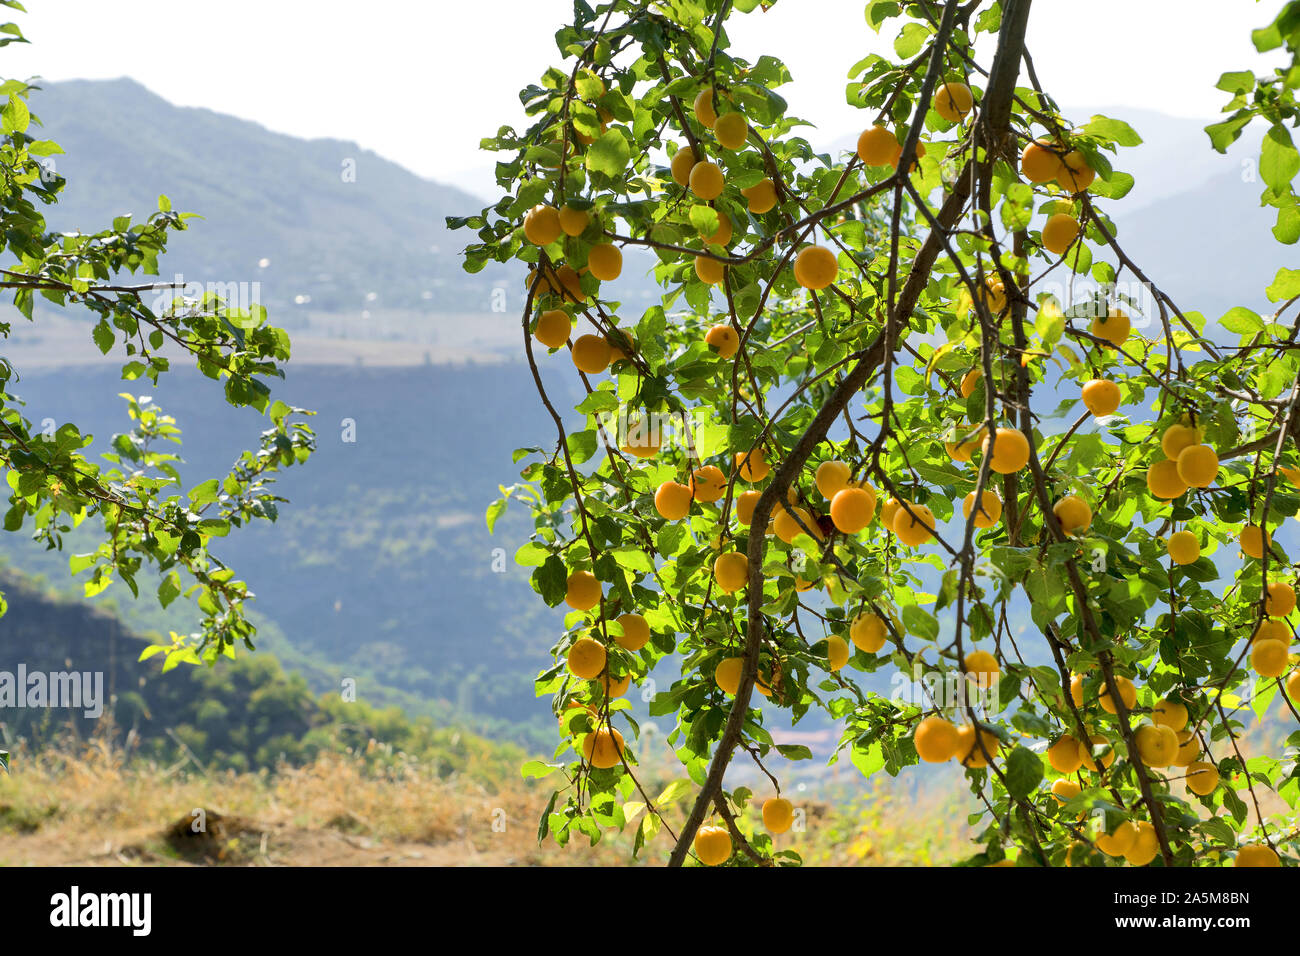 Armenia: Apricots in front of Caucasus mountain scenery Stock Photo